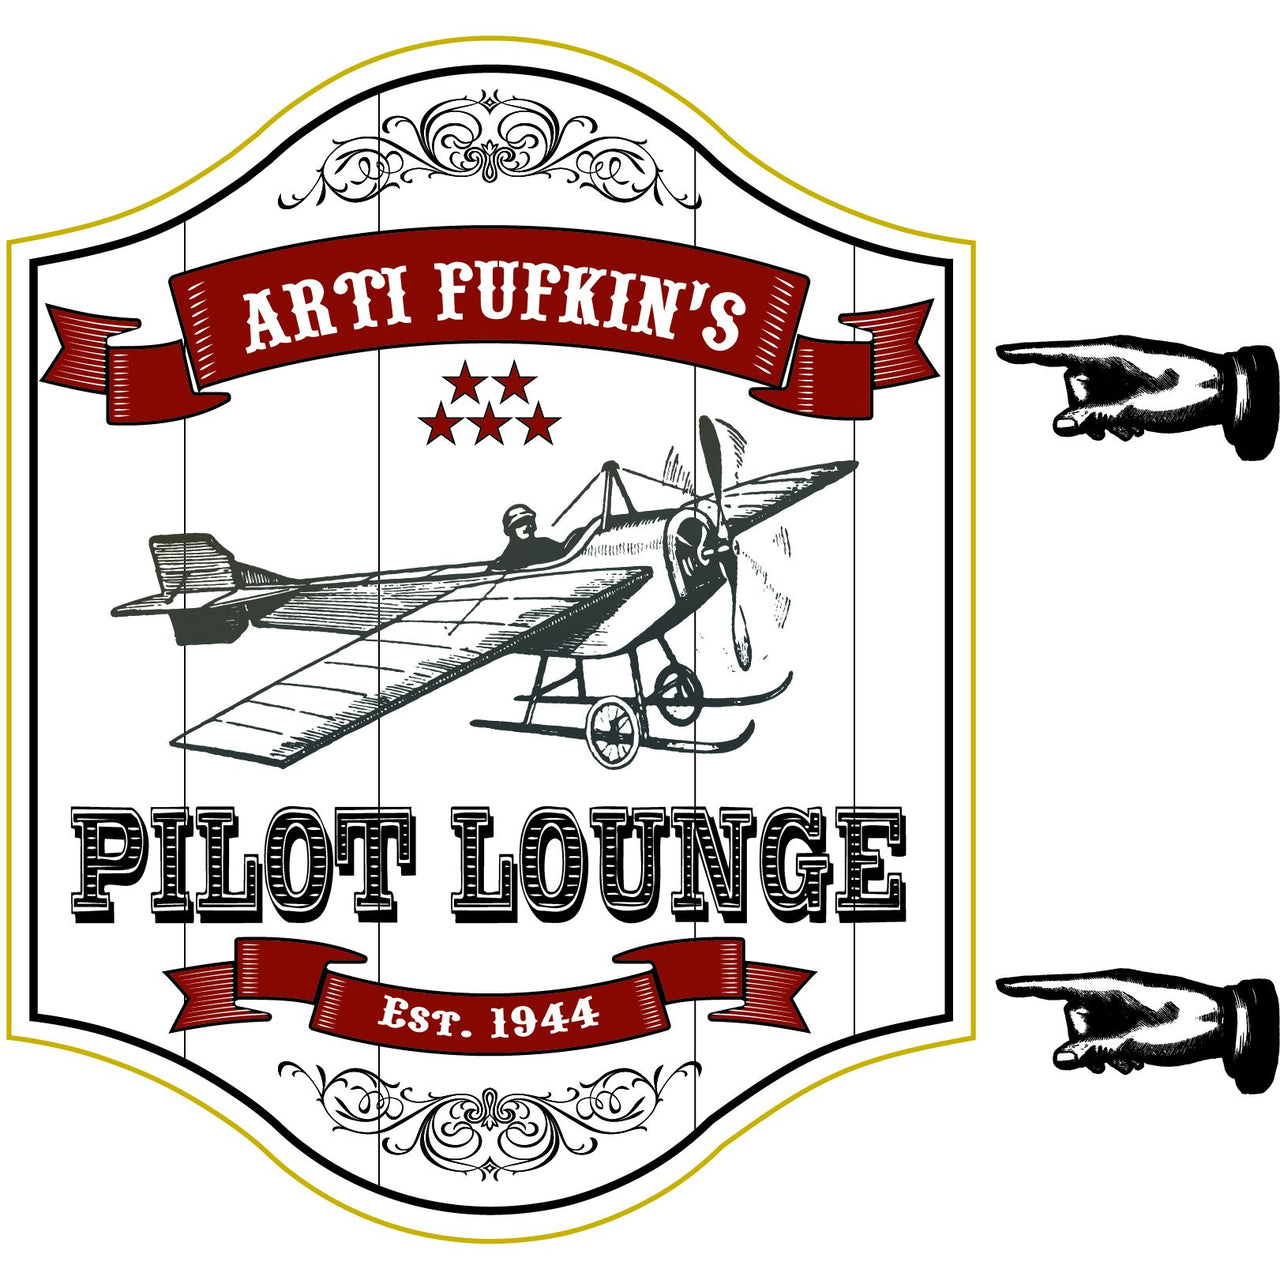 Personalized wood sign; add you name to Pilot Lounge sign; image of early airplane